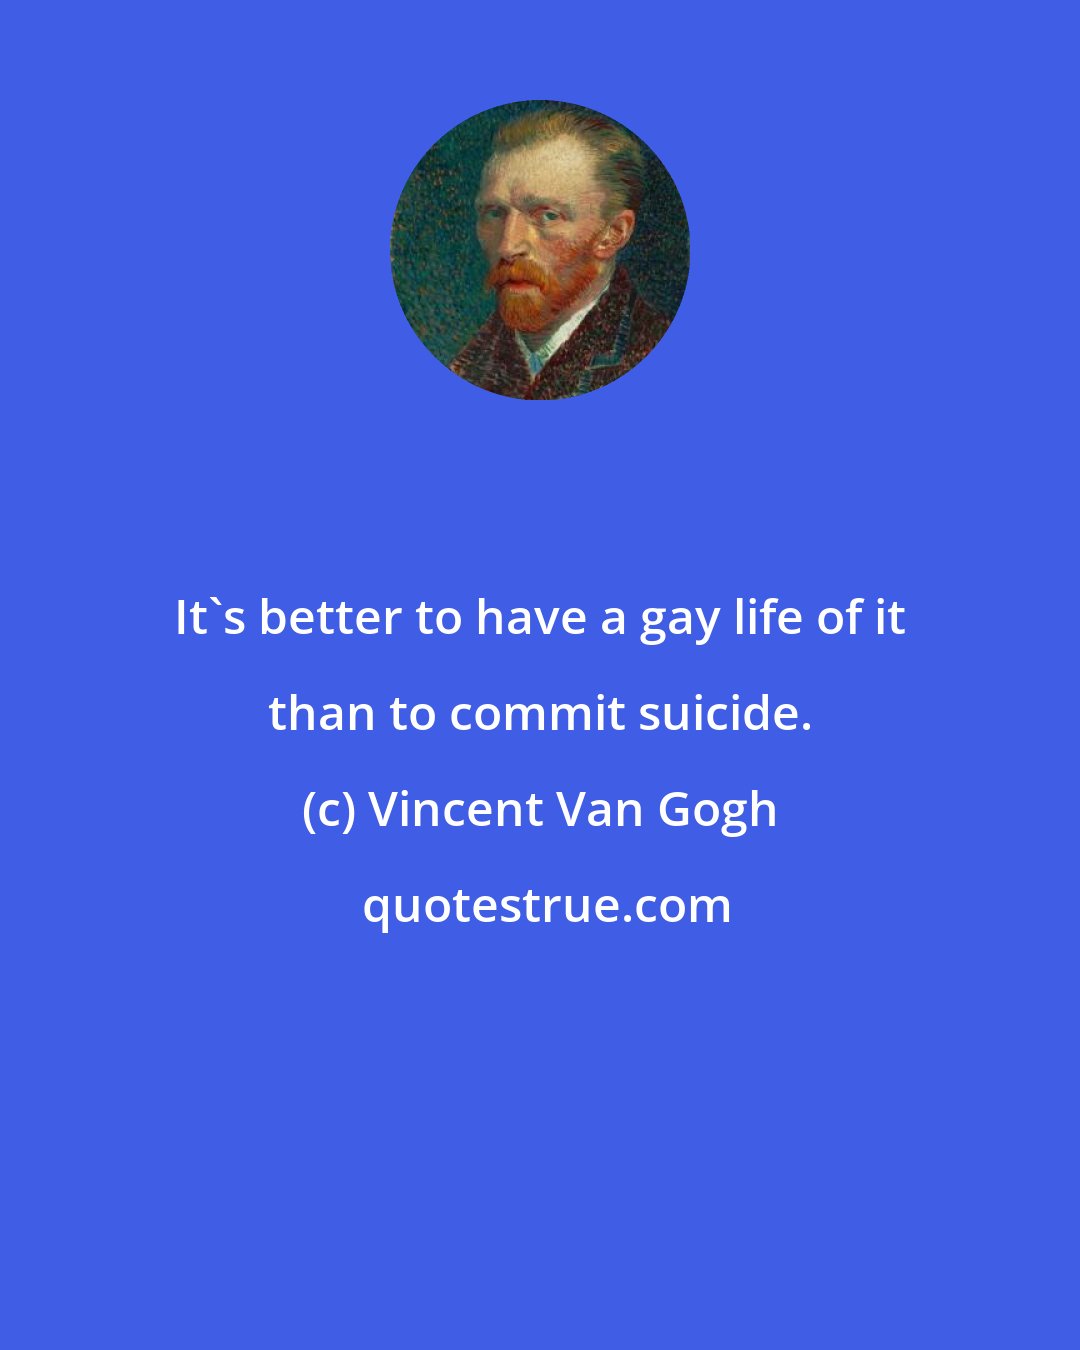 Vincent Van Gogh: It's better to have a gay life of it than to commit suicide.